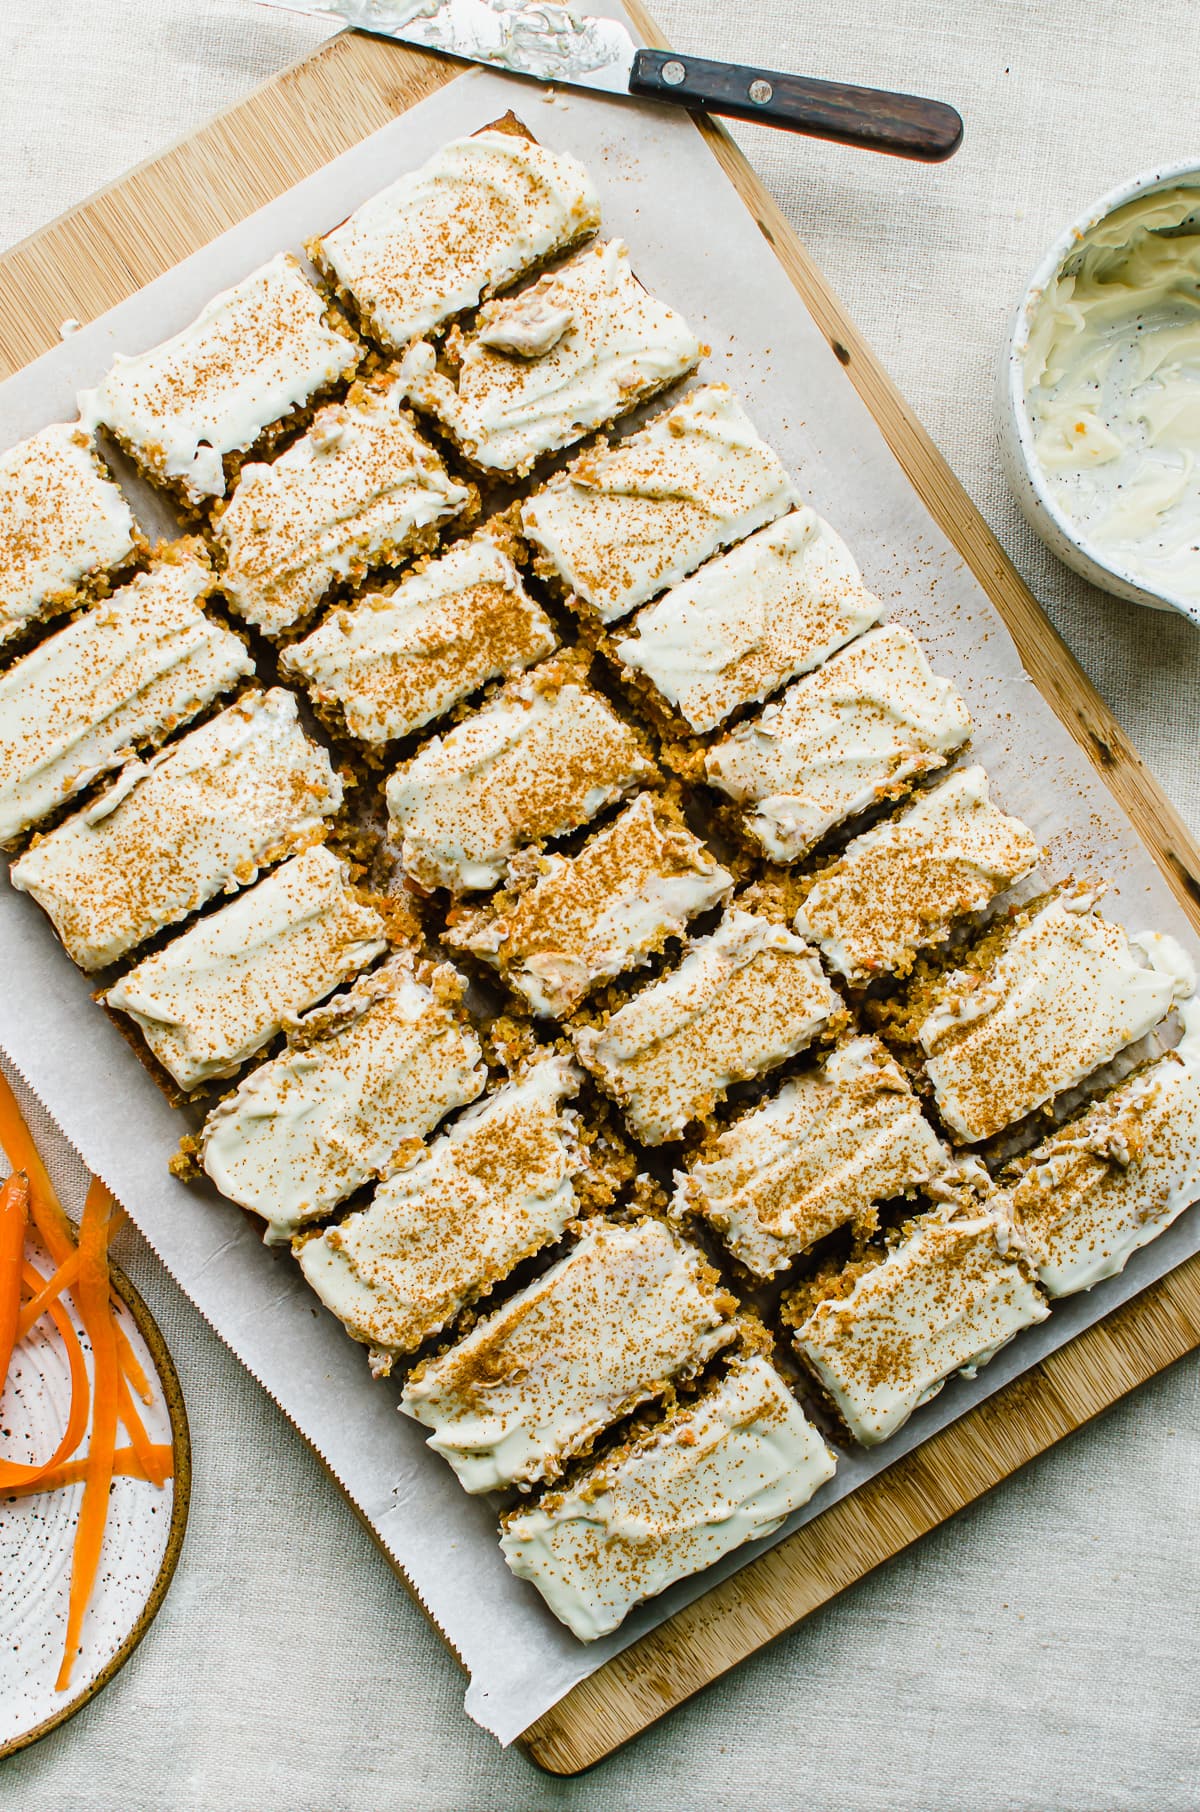 Carrot cake sliced into bars on a parchment paper lined cutting board.